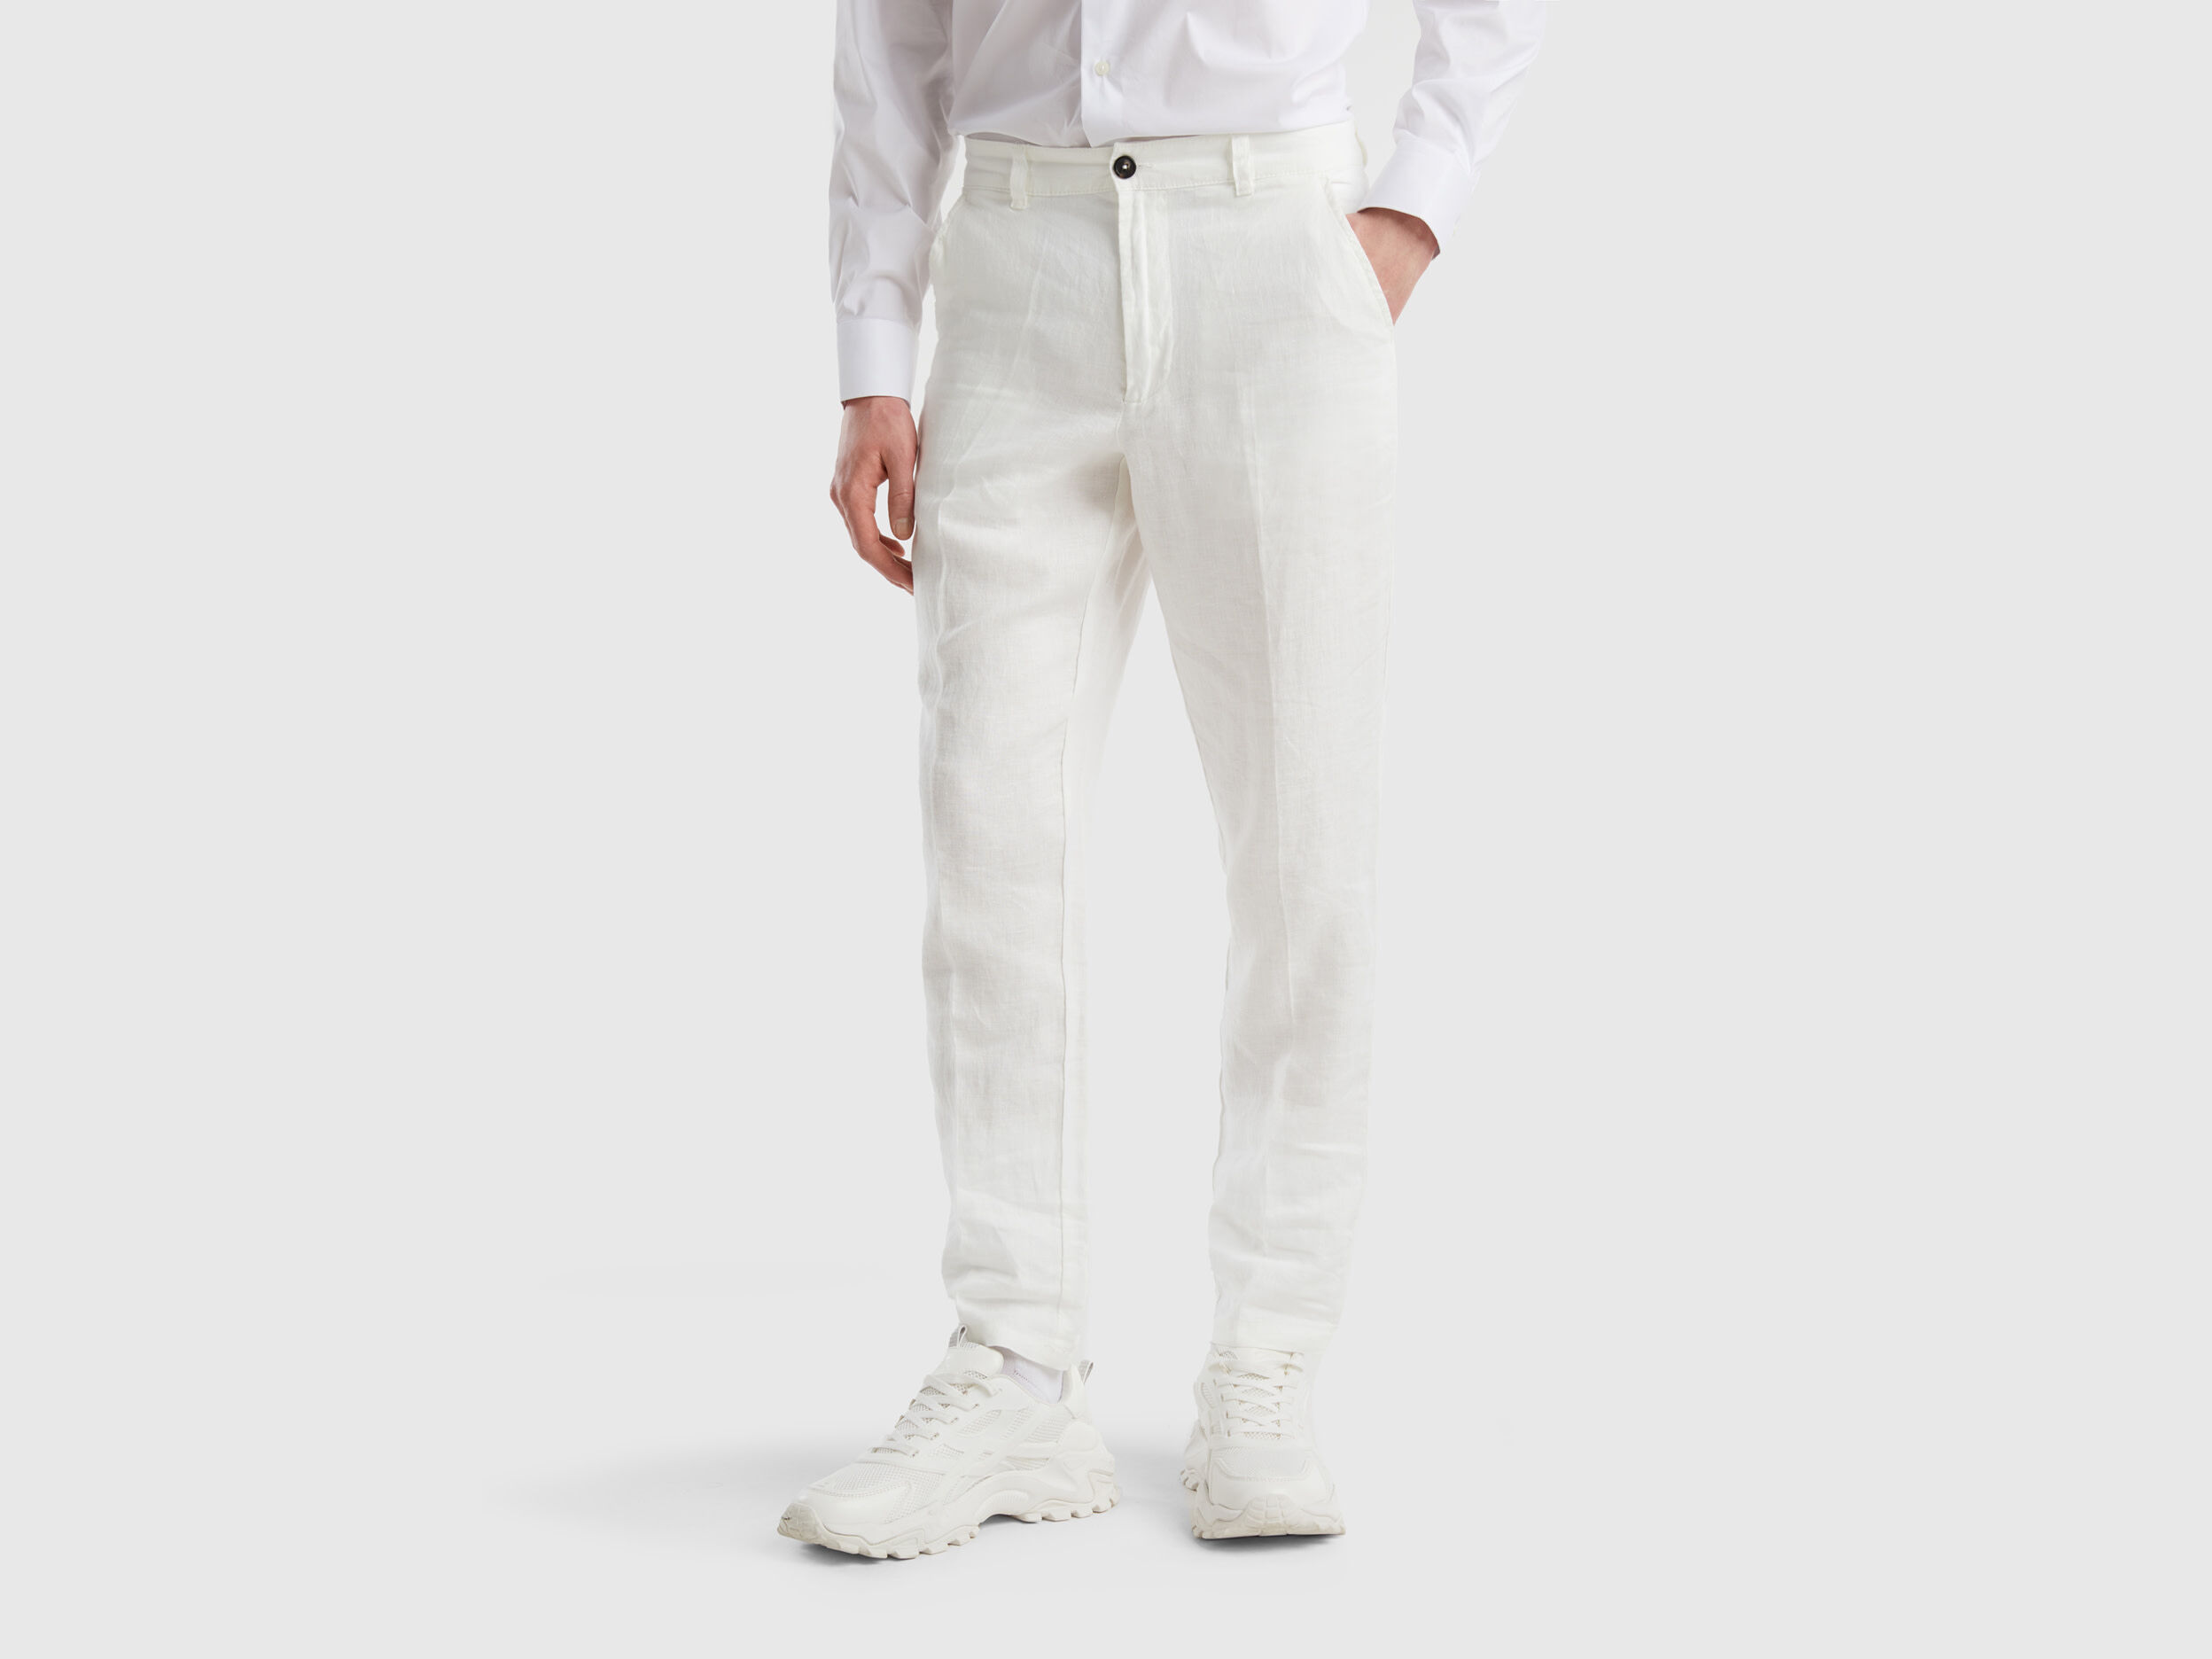 Men Pure Color Linen Trousers Elastic Drawstring Tapered Ankle Loose Long  Pants Casual Jogger Pant From Ziweilin, $33.96 | DHgate.Com